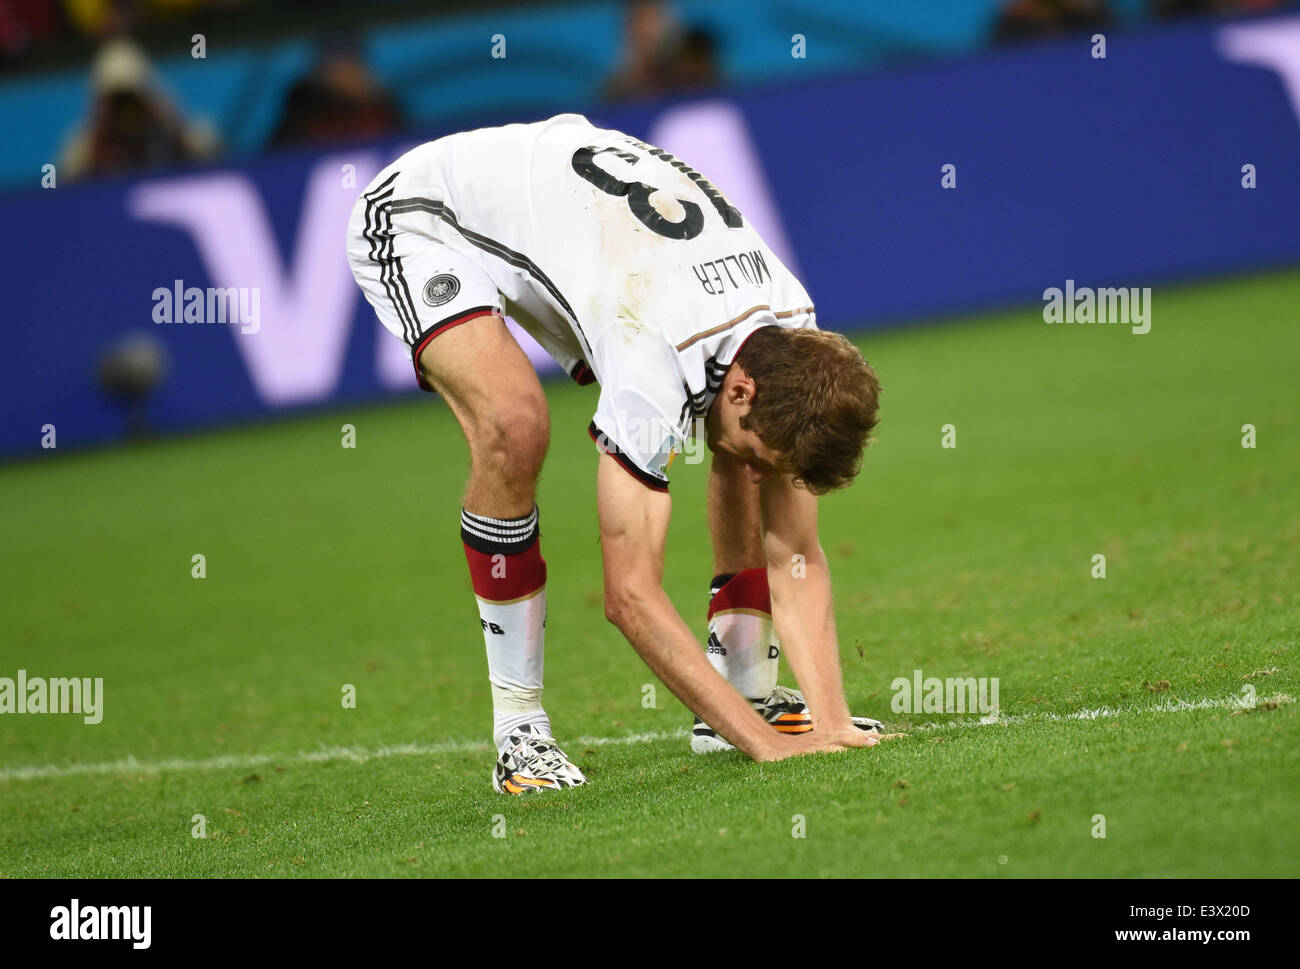 Porto Alegre, Brazil. 30th June, 2014. Germany's Thomas Muller reacts after missing a chance during a Round of 16 match between Germany and Algeria of 2014 FIFA World Cup at the Estadio Beira-Rio Stadium in Porto Alegre, Brazil, on June 30, 2014. Credit:  Li Ga/Xinhua/Alamy Live News Stock Photo